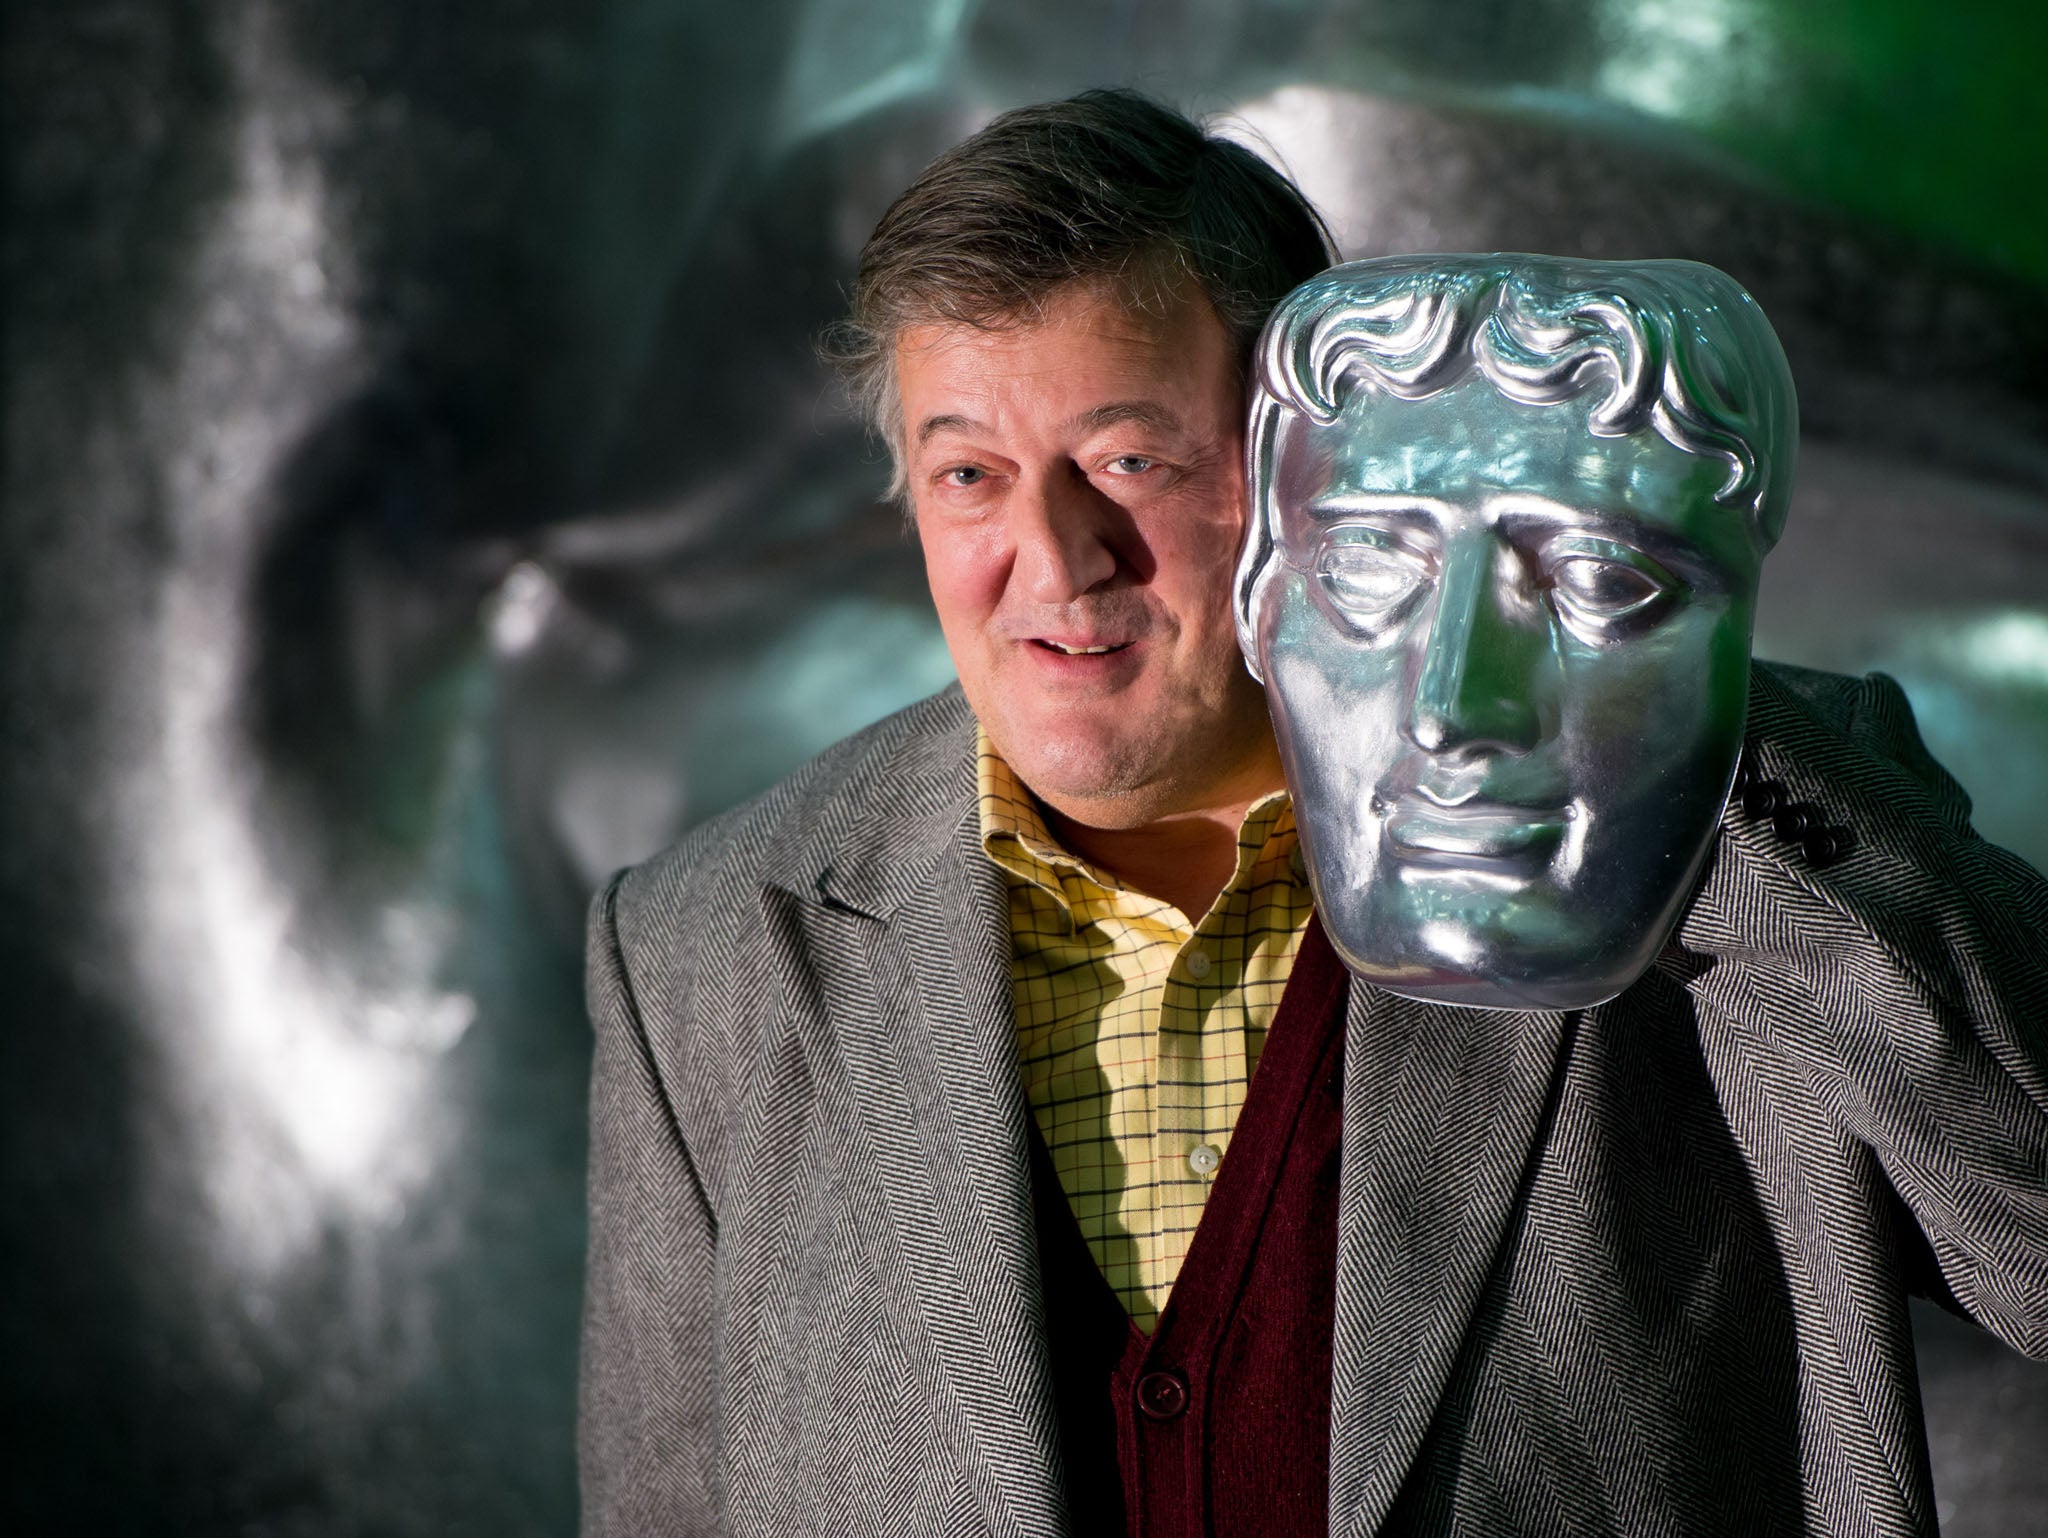 Writer, actor and broadcaster Stephen Fry attacked the use of 'trigger warnings' in literature